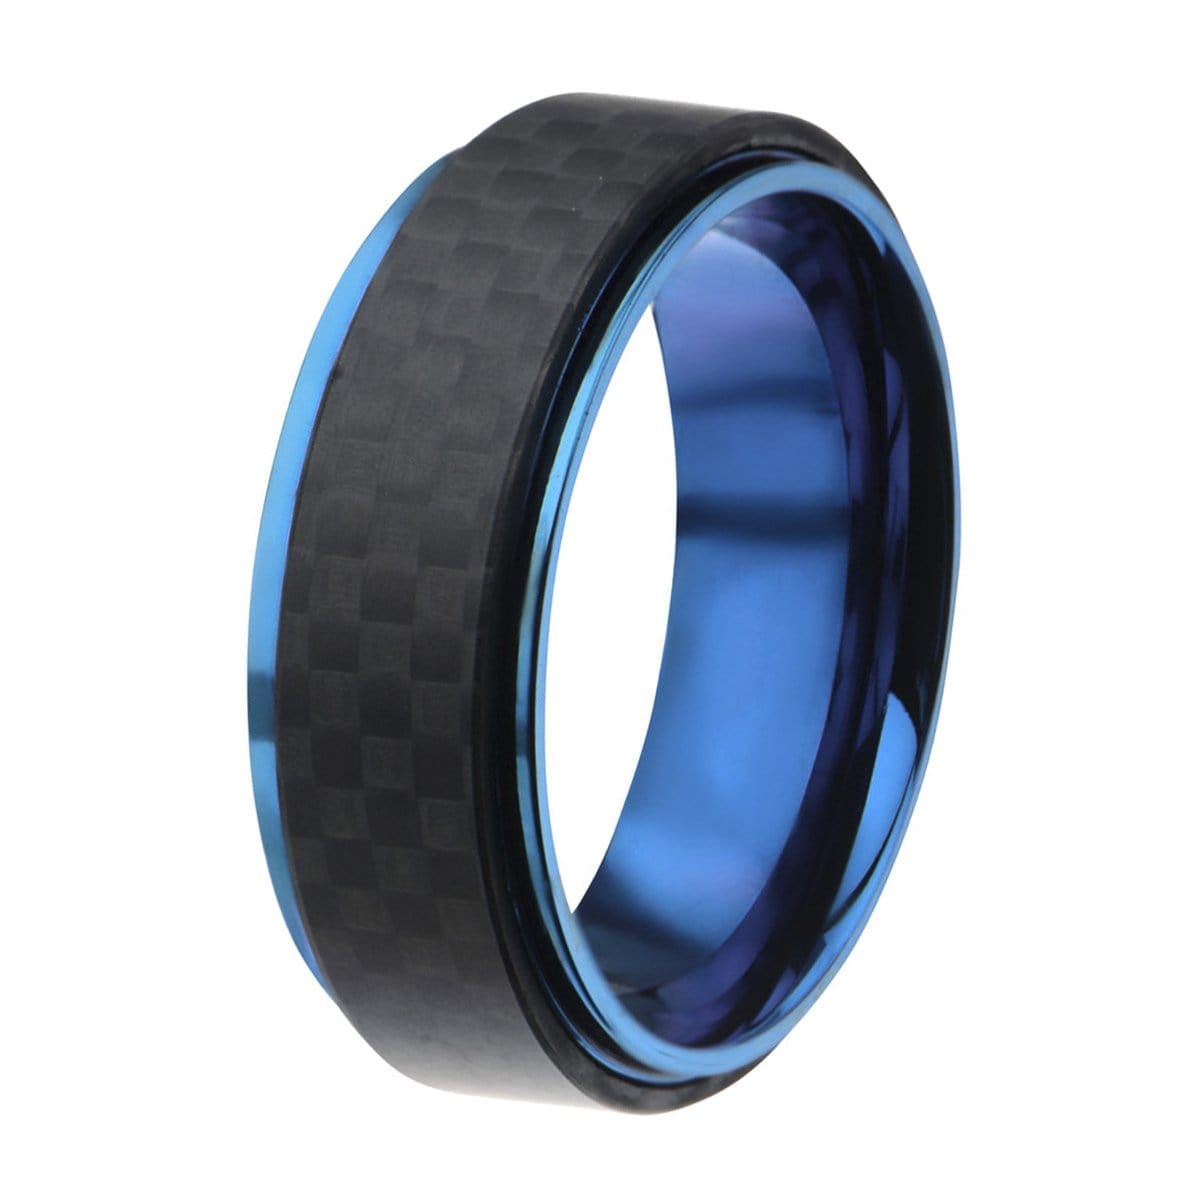 INOX JEWELRY Rings Blue Stainless Steel Black Solid Carbon Fiber Band Ring